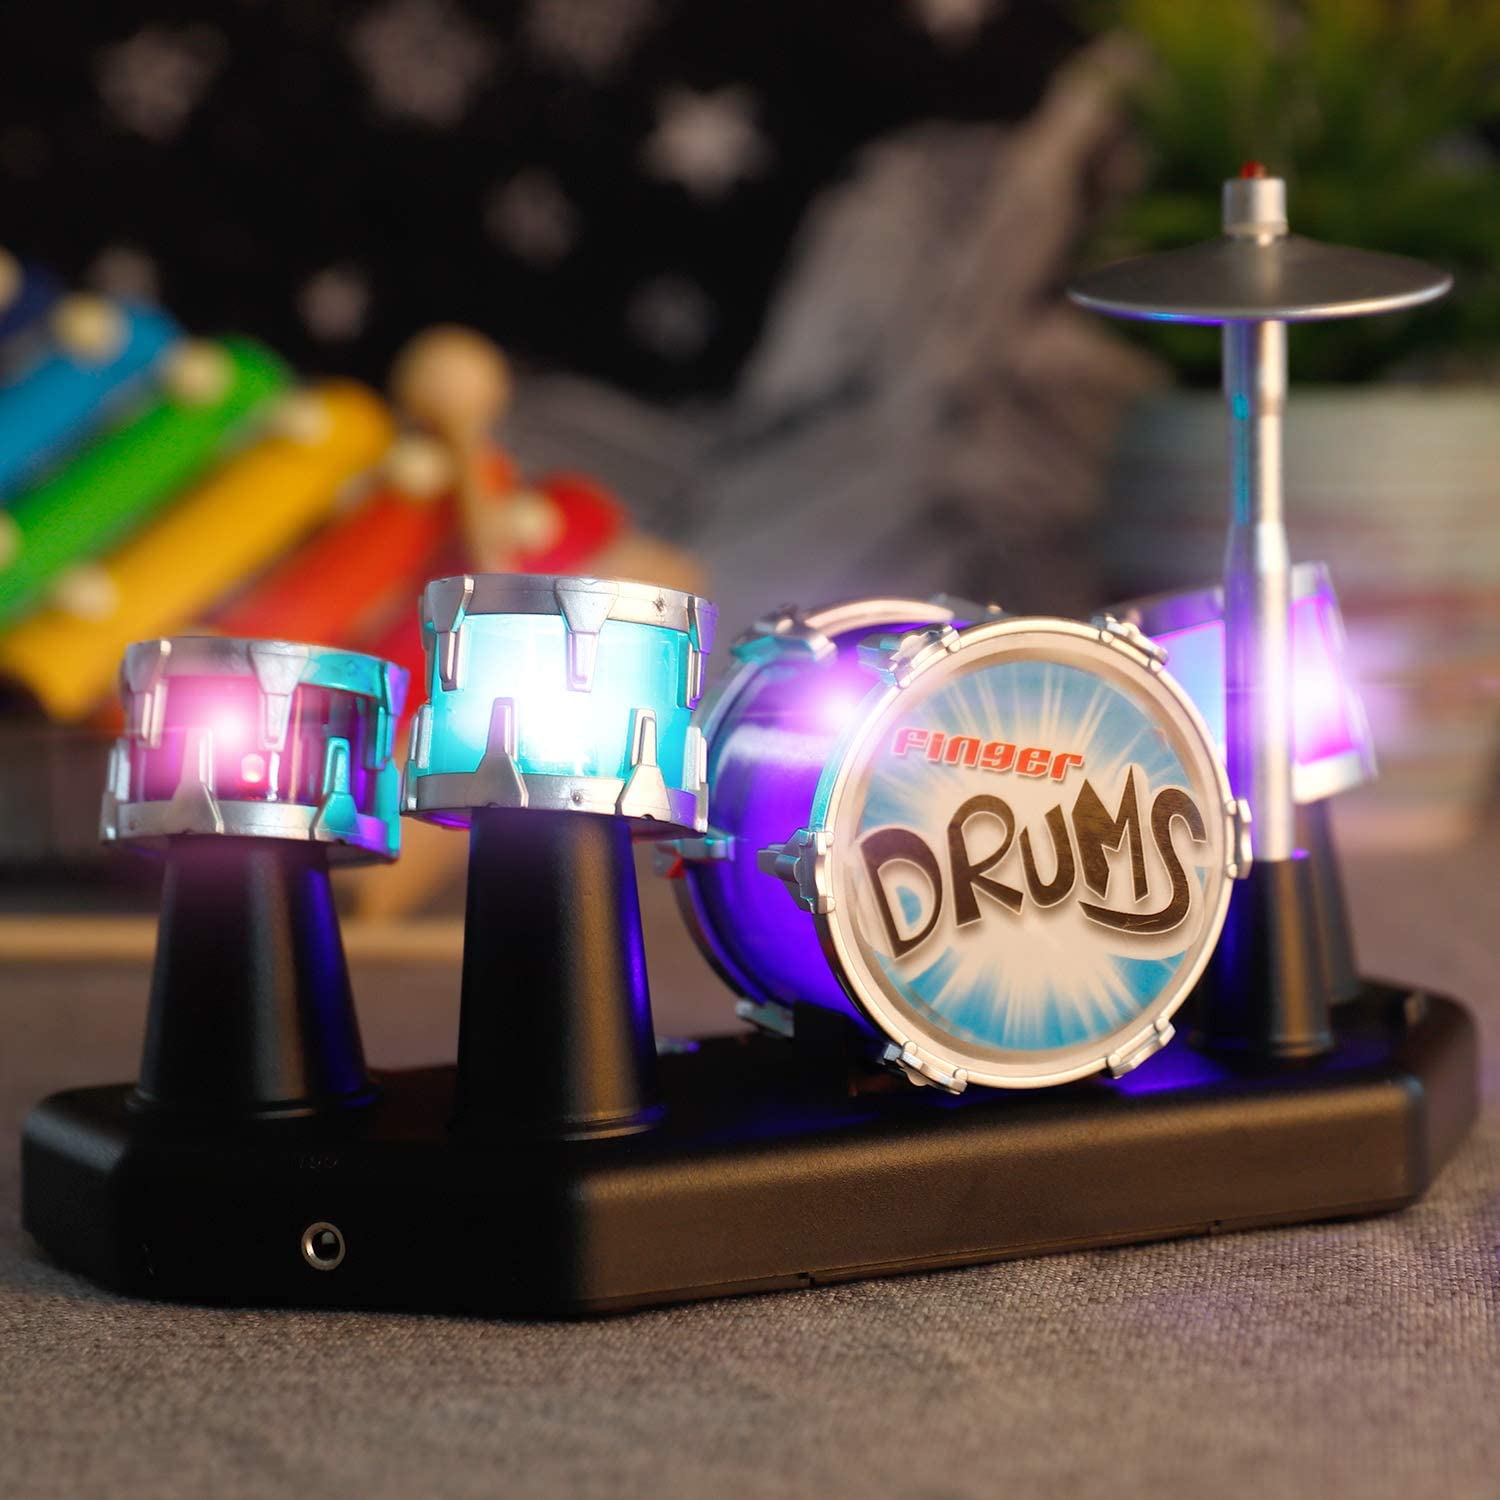 A mini desktop finger drum kit with purple and blue lights switched on.